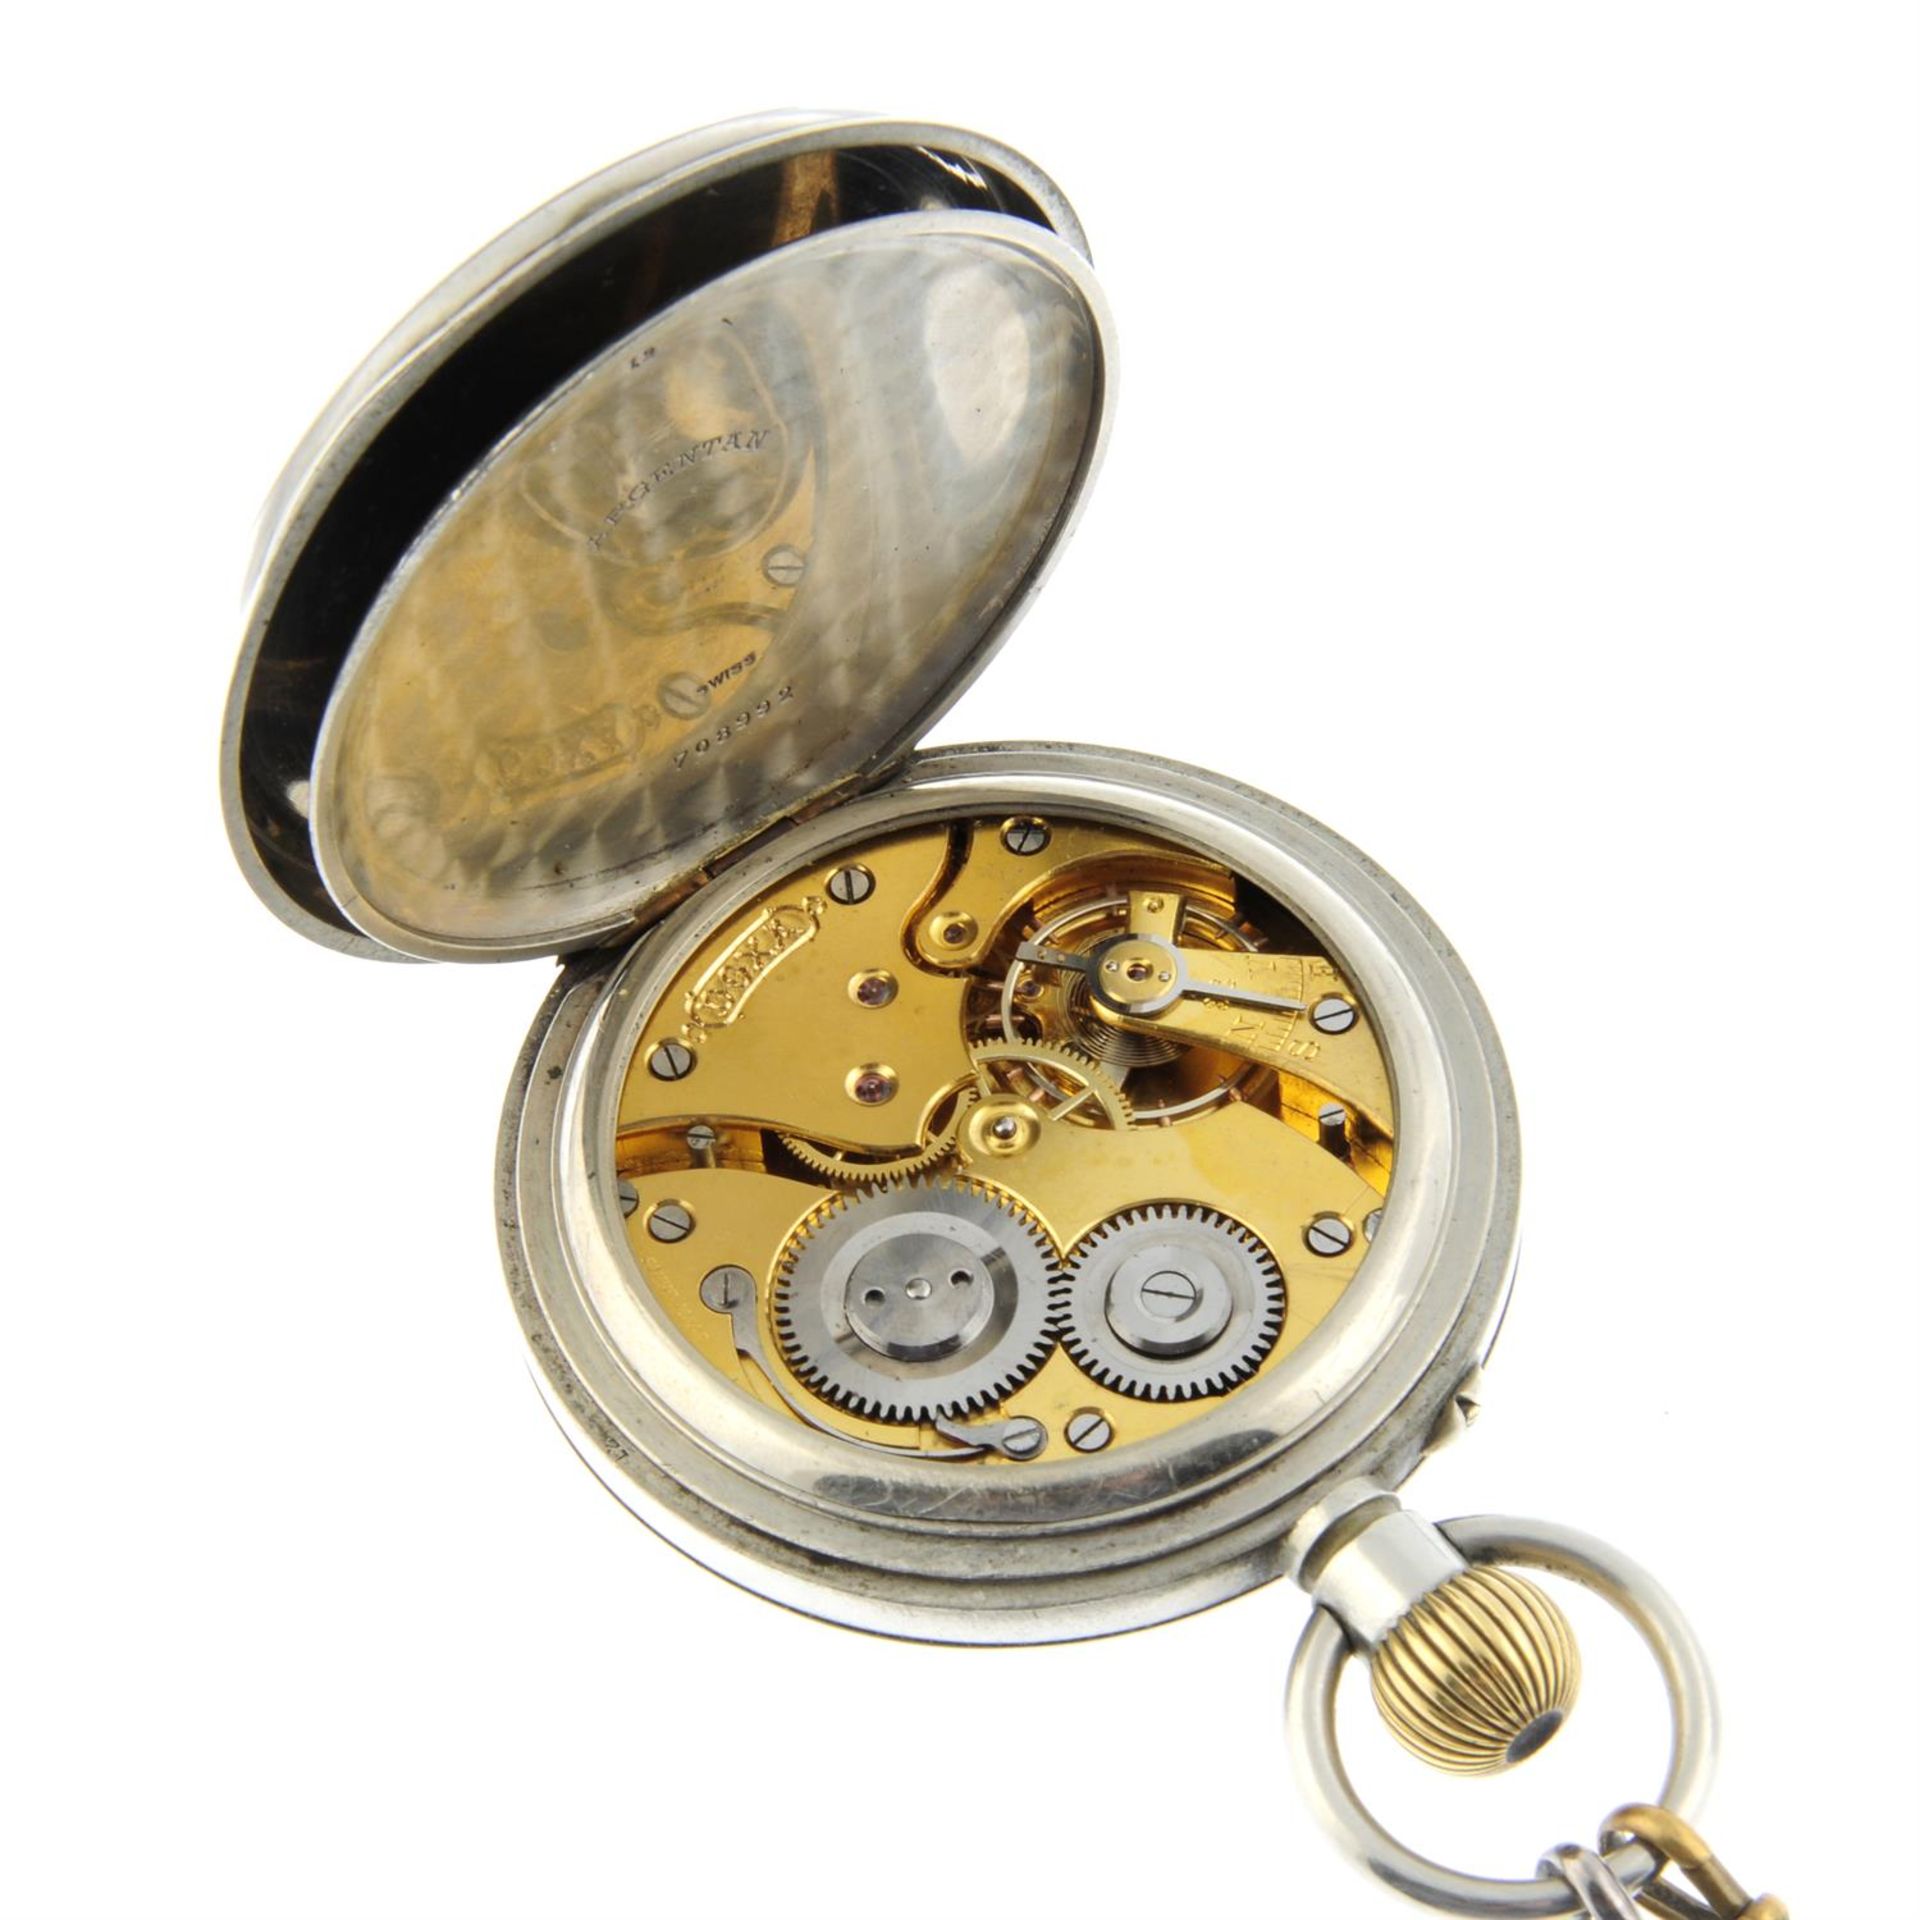 A silver plated open face 'Goliath' pocket watch by Doxa, 65mm. - Image 3 of 3